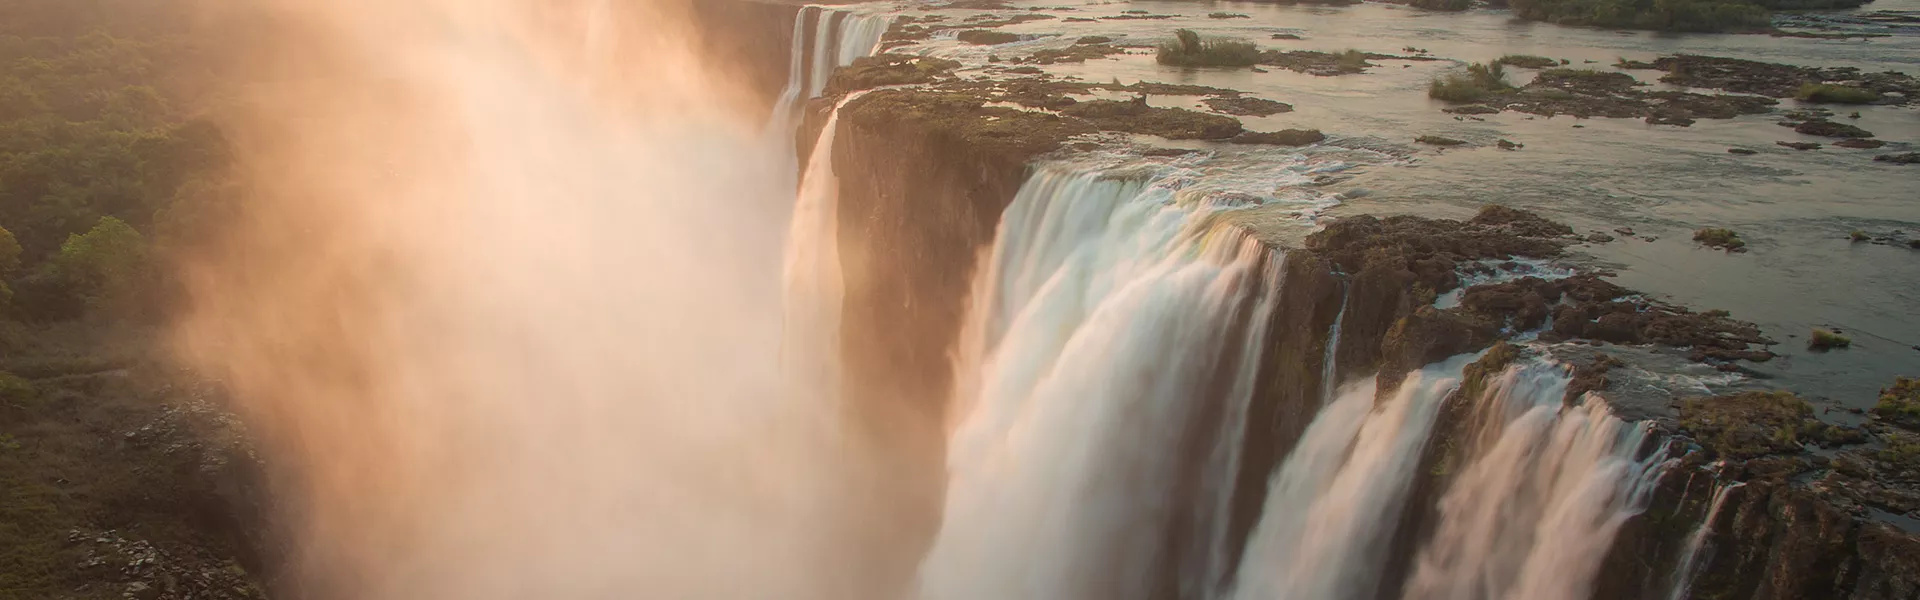 Victoria Falls seen from the bird's eye view